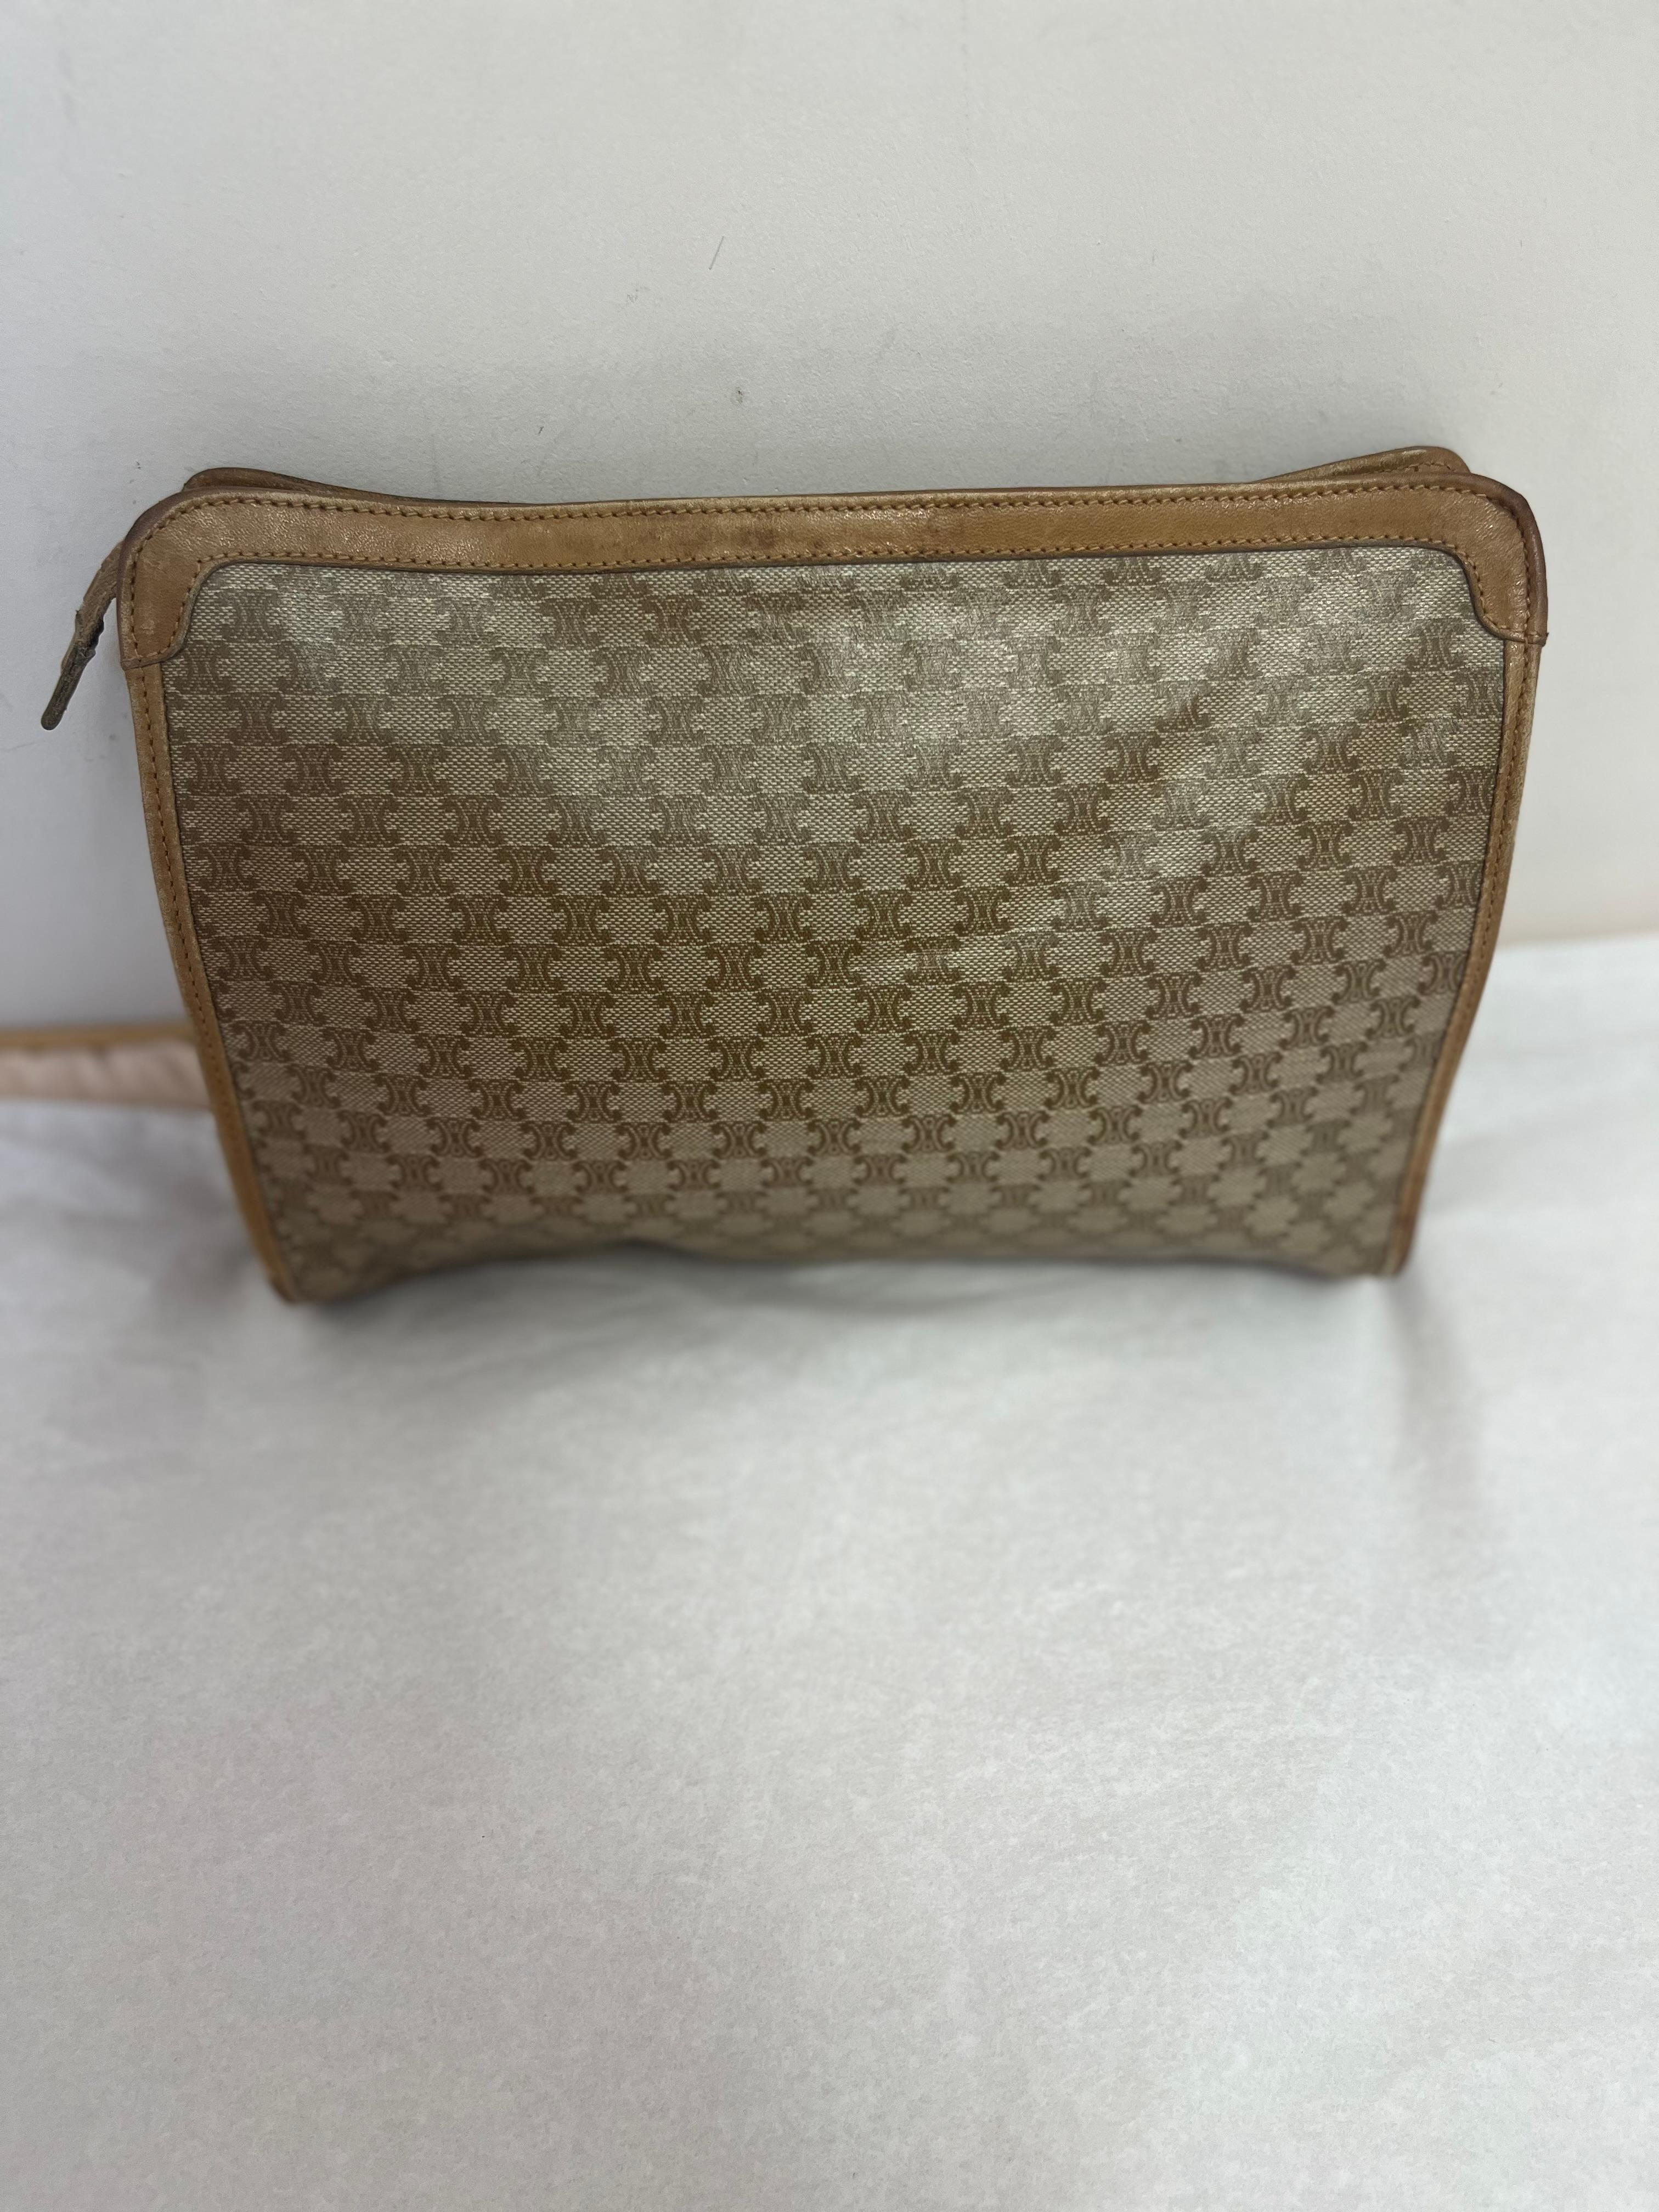 This is a canvas and leather Macadam clutch in brown from the design house of Celine which was established in the 1940s and is still operating today.
The leather lining has a large zipped pocket, and the top zip closure has a Celine stamped